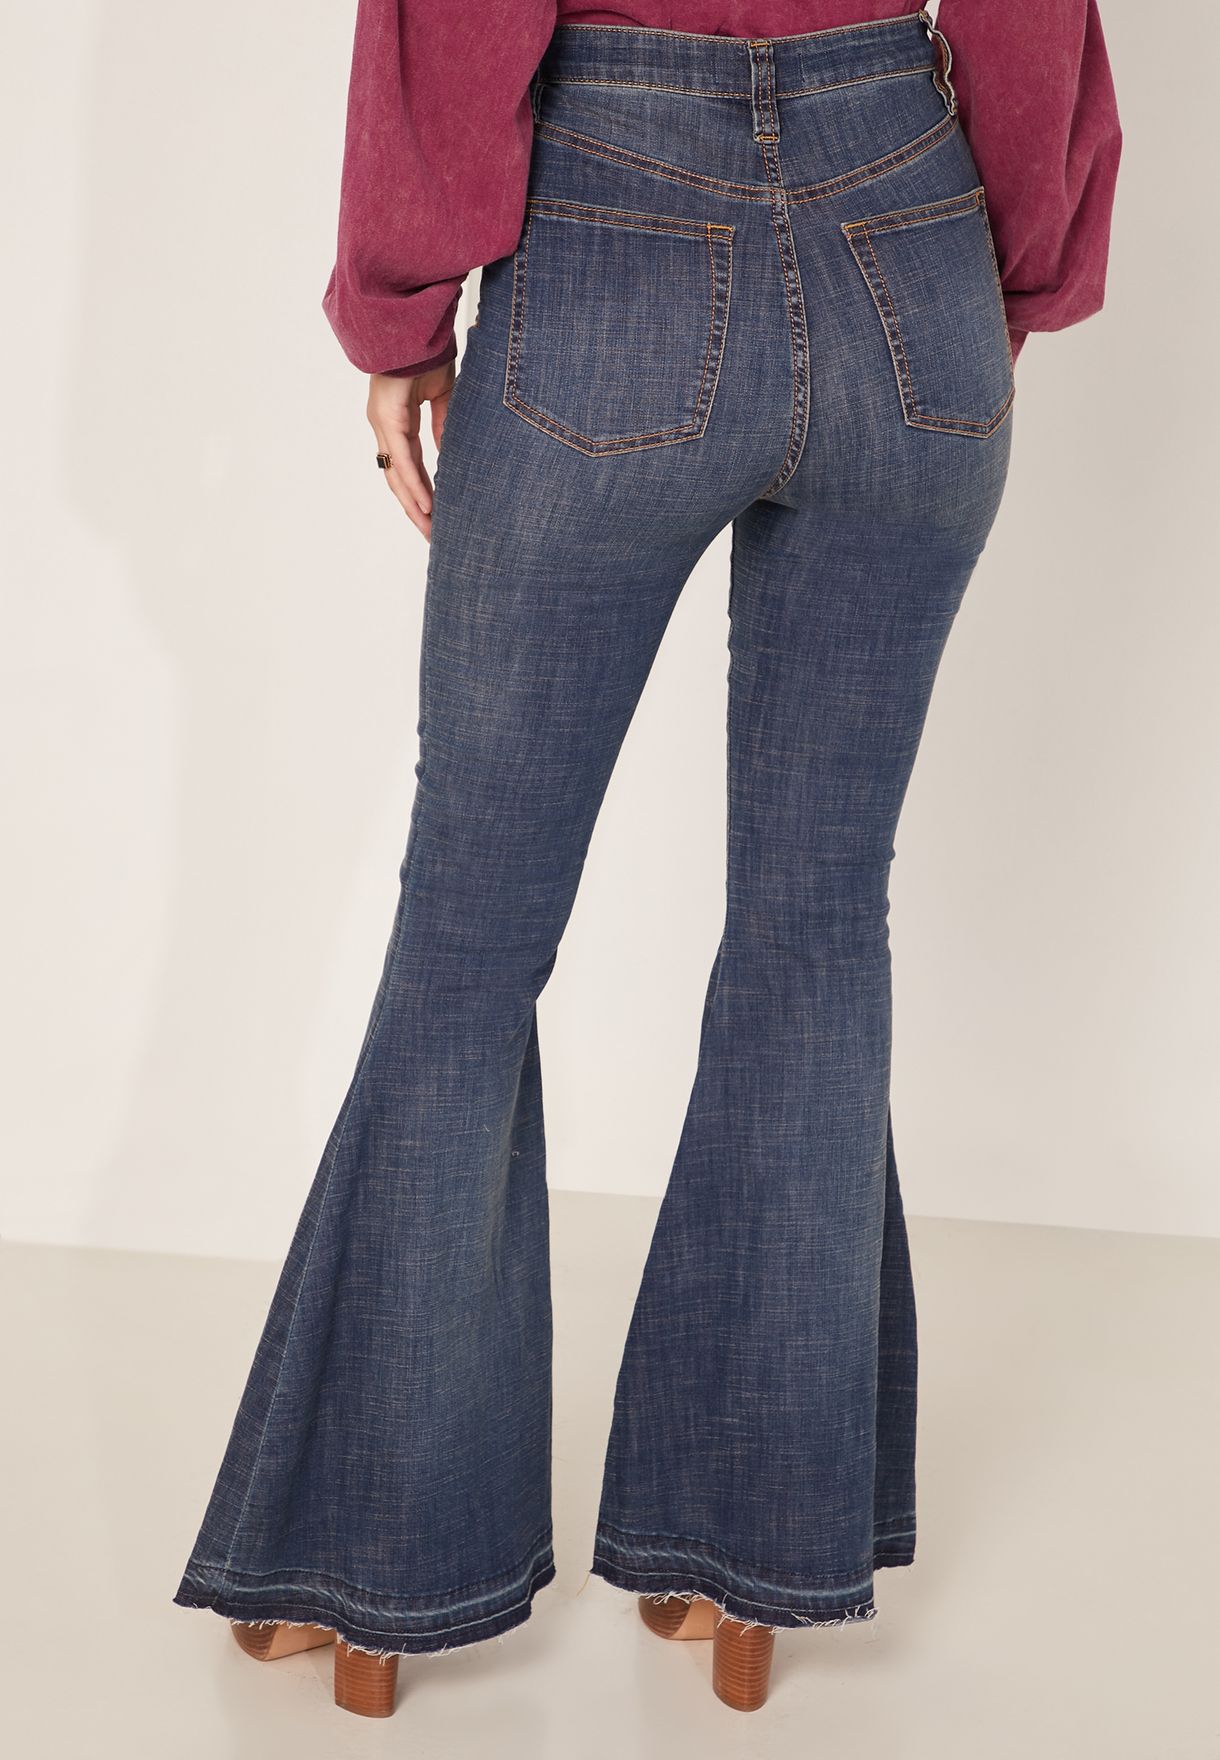 Irreplaceable  Flared Jeans